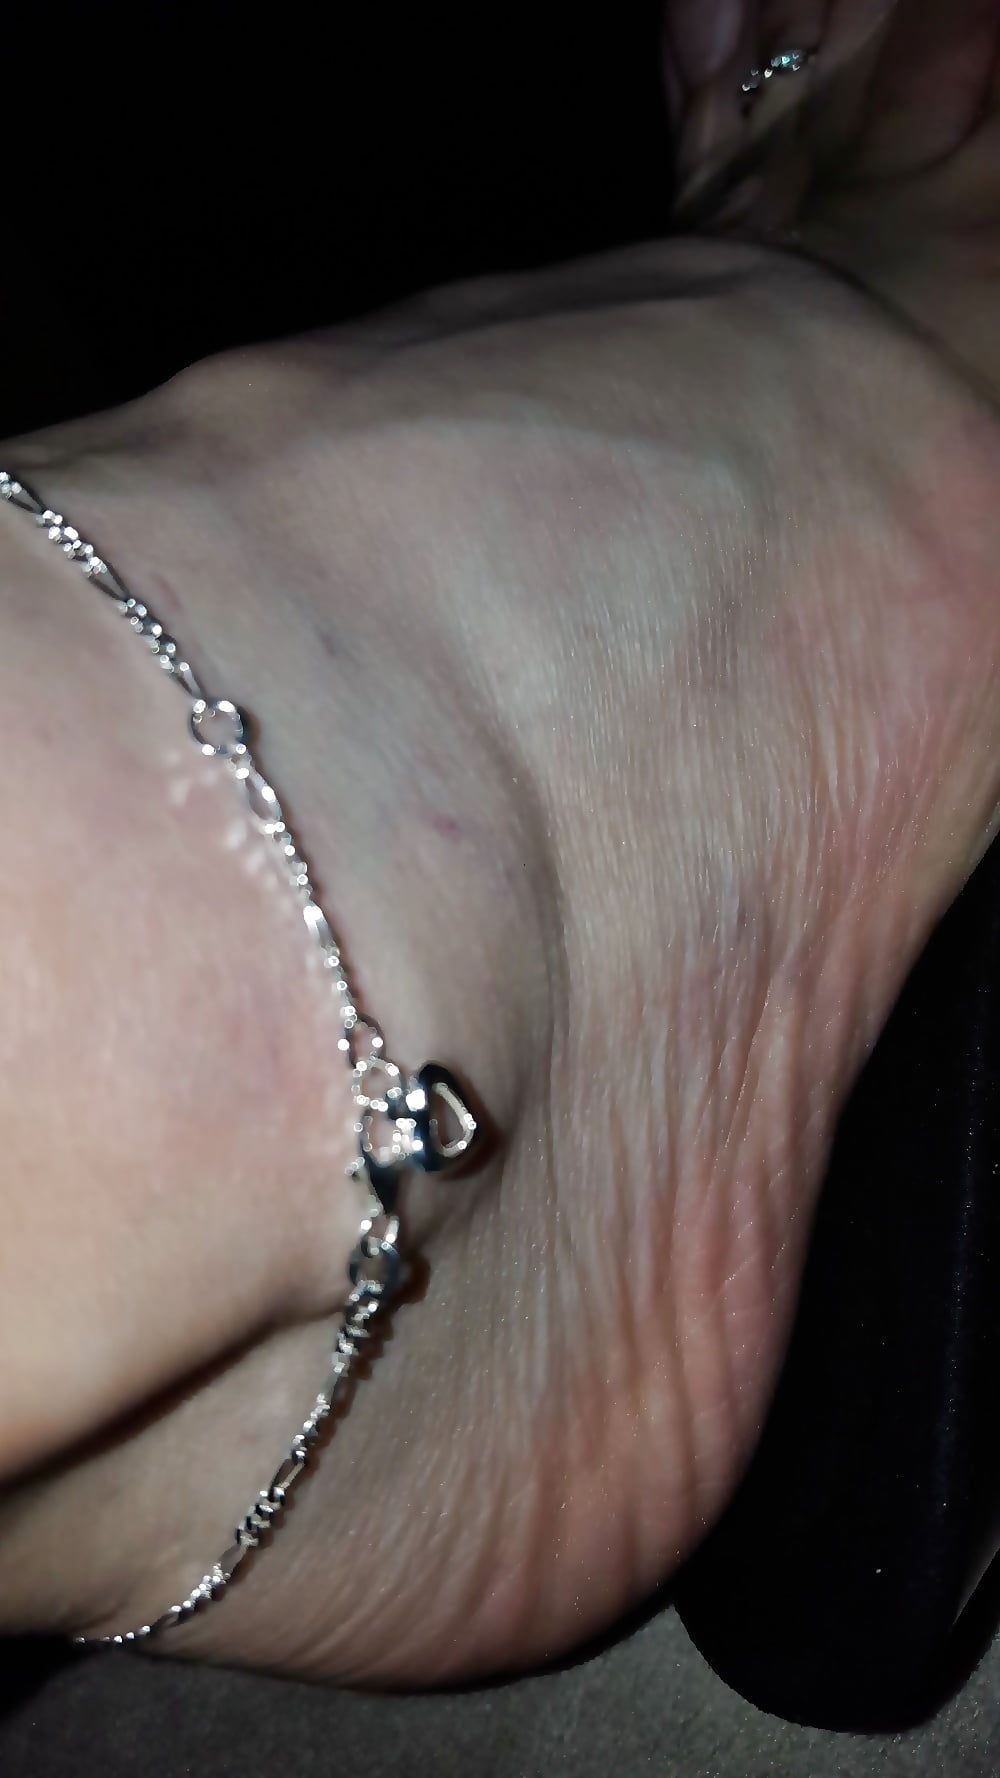 Pleaser Adore-701 ++ Feet ++ Anklets ++ Toe Ring